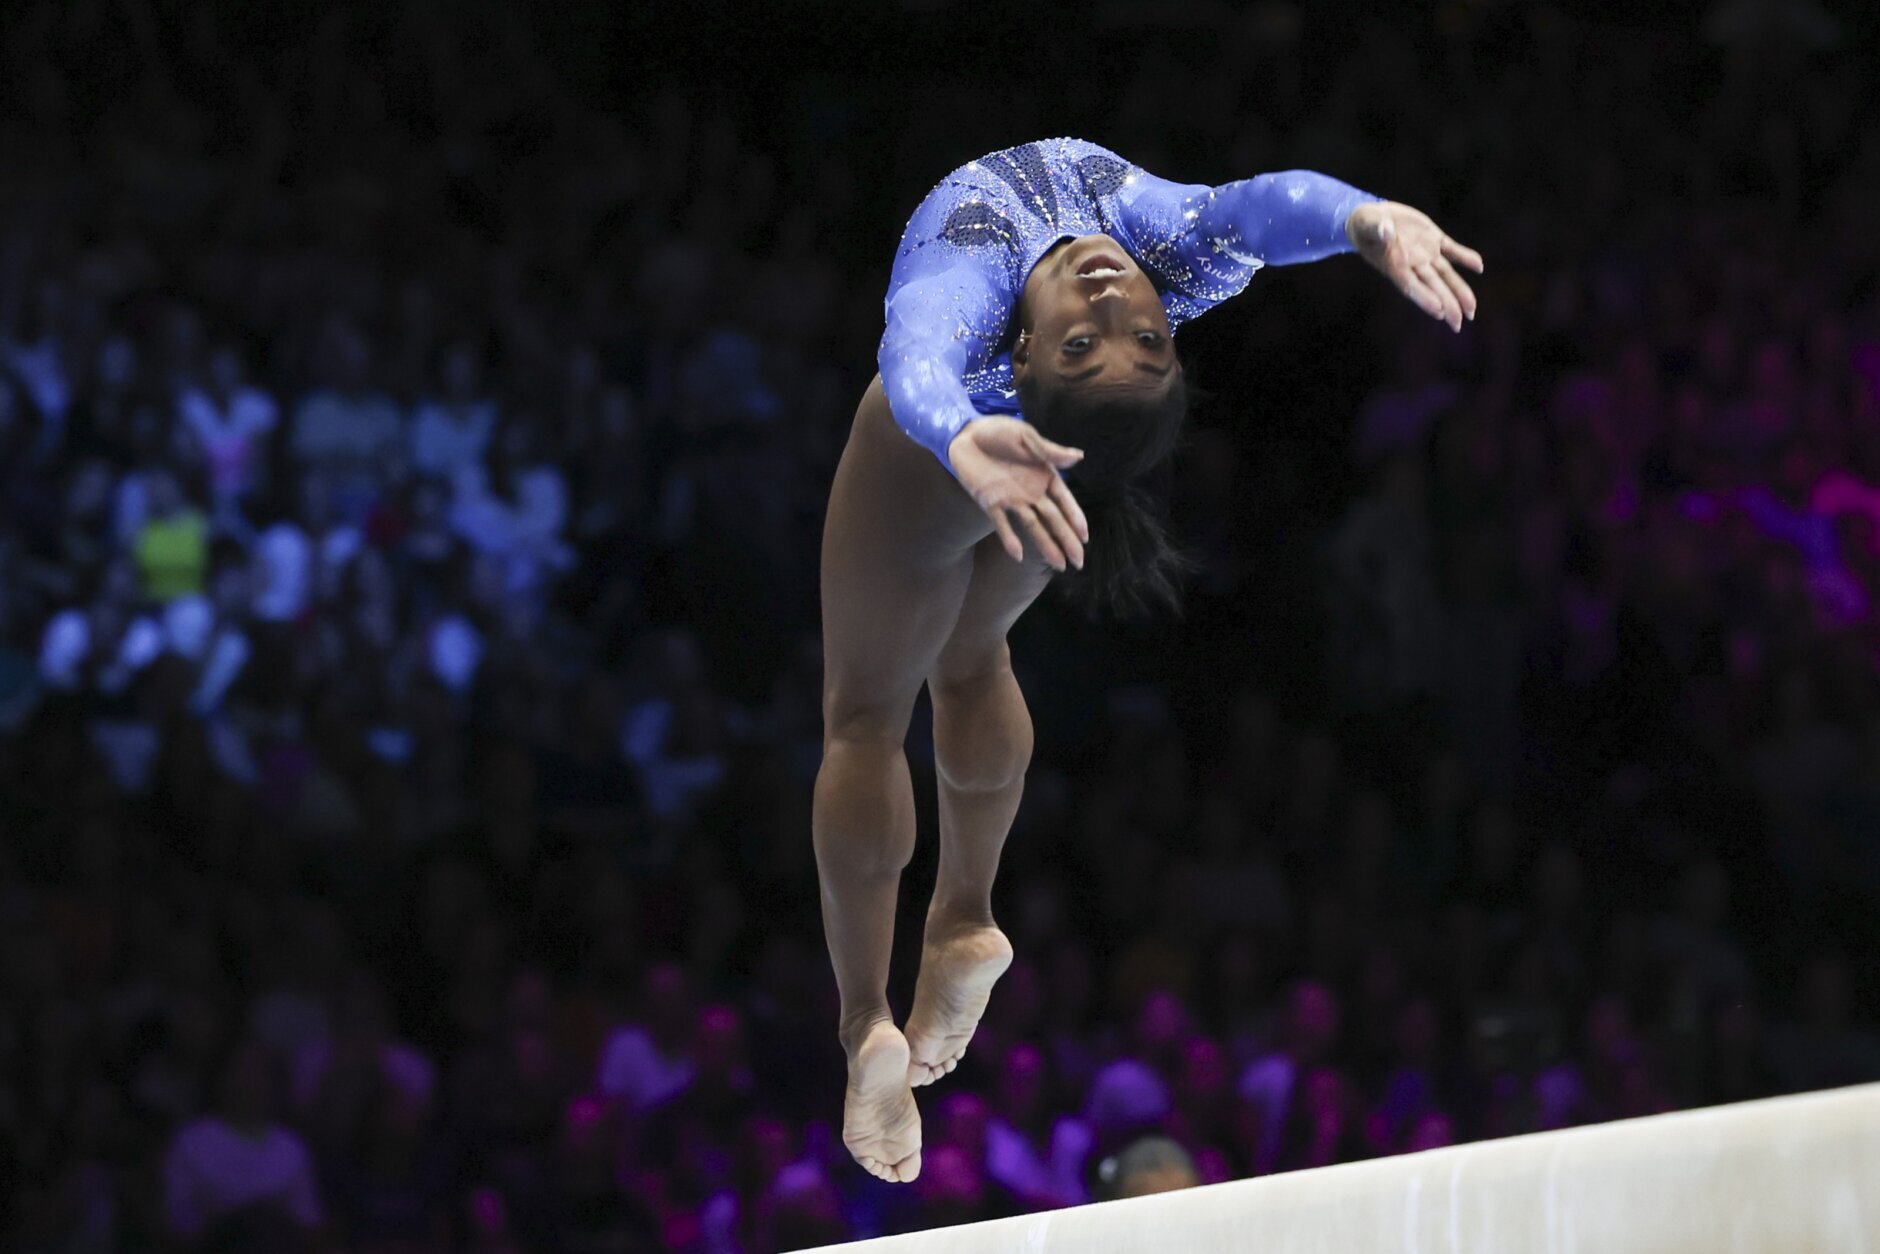 simone-biles-makes-history-with-sixth-all-around-title-becomes-most-decorated-gymnast-ever